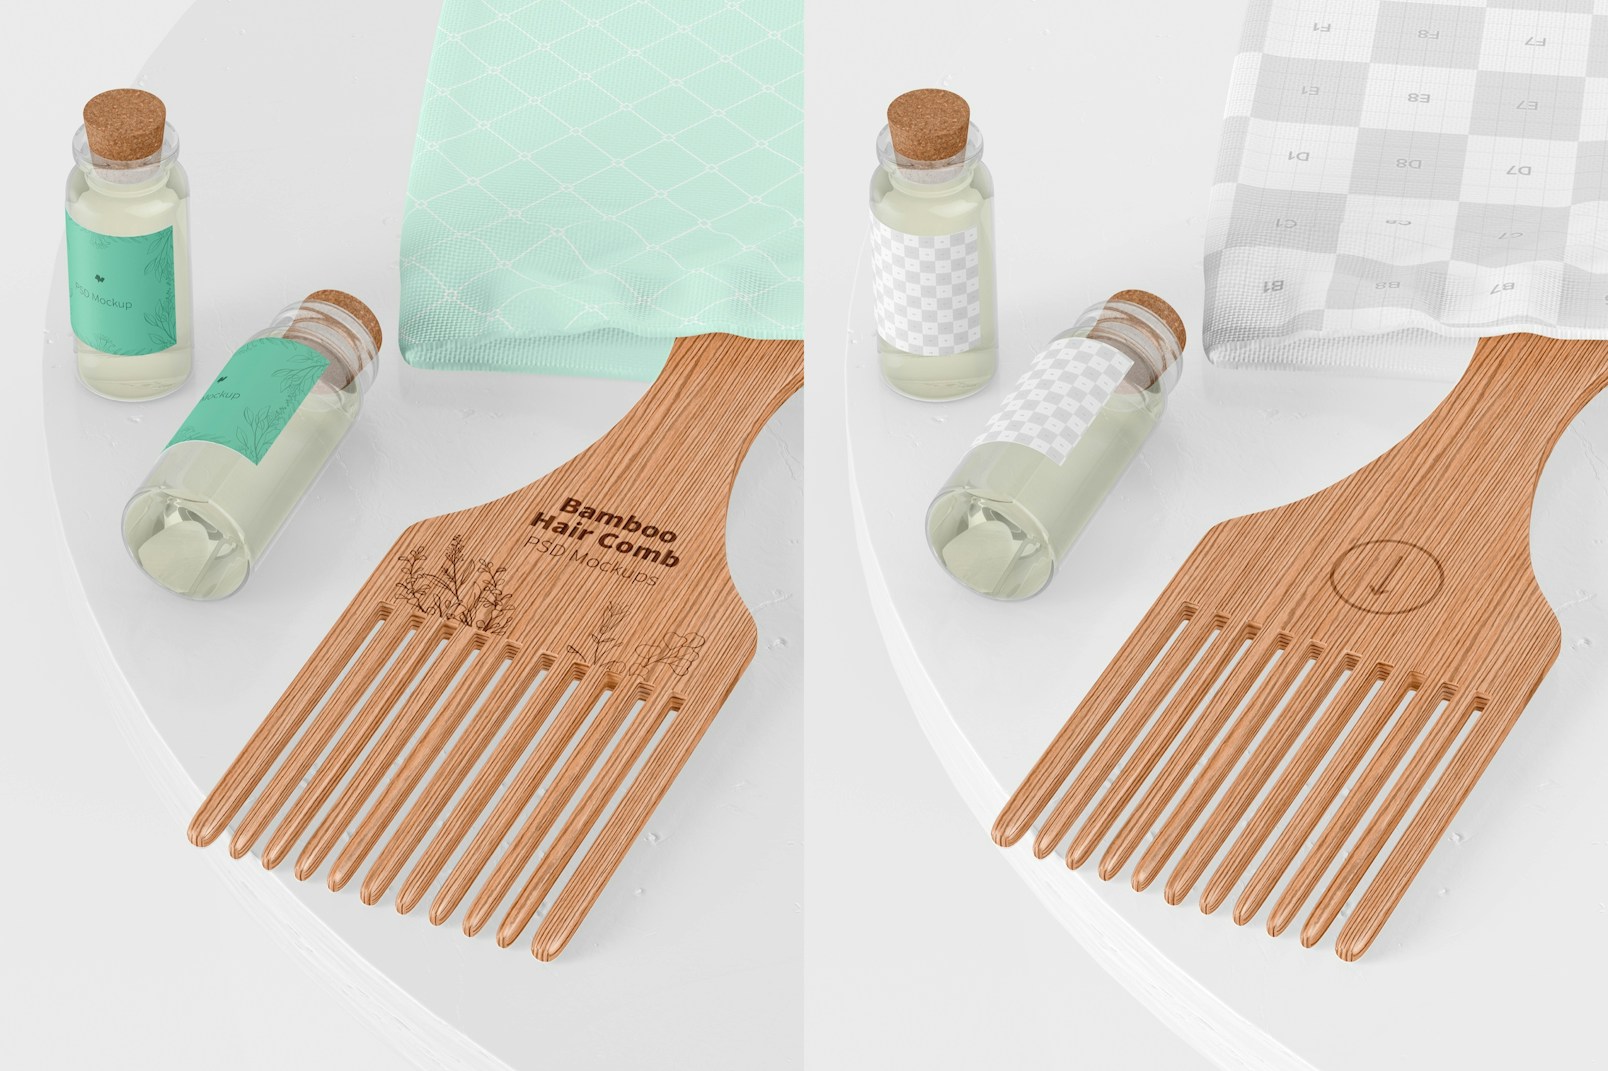 Bamboo Hair Comb with Glass Bottles Mockup